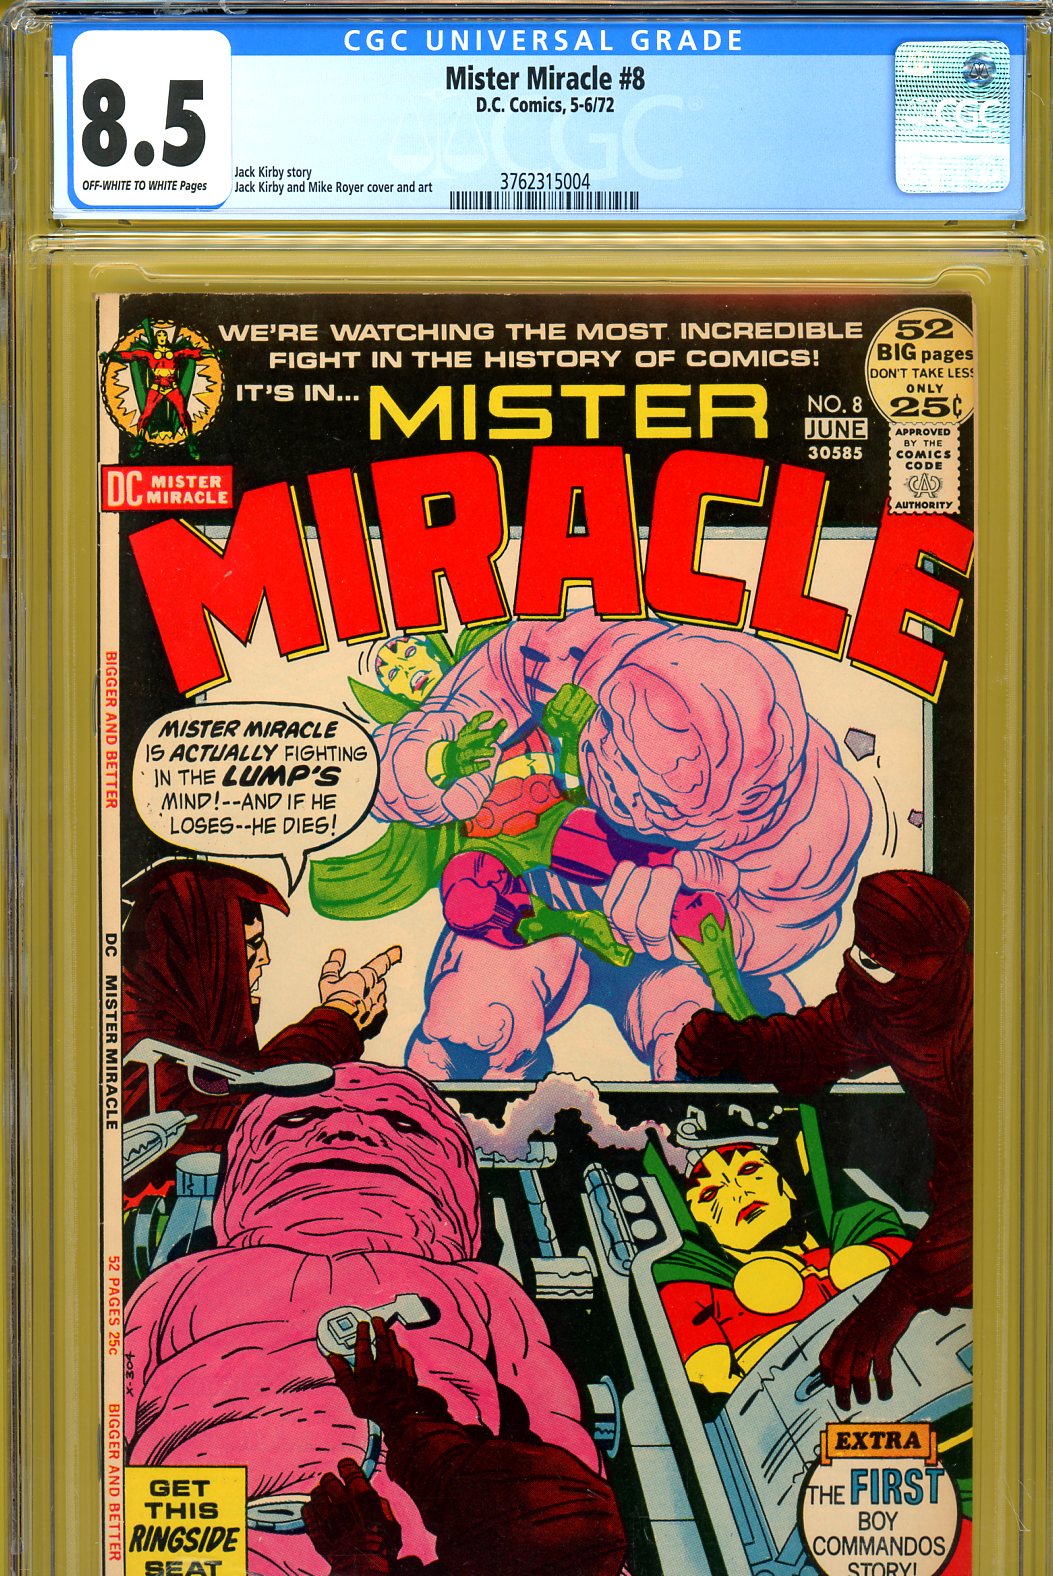 Mister Miracle #8 CGC 8.5 ow/w